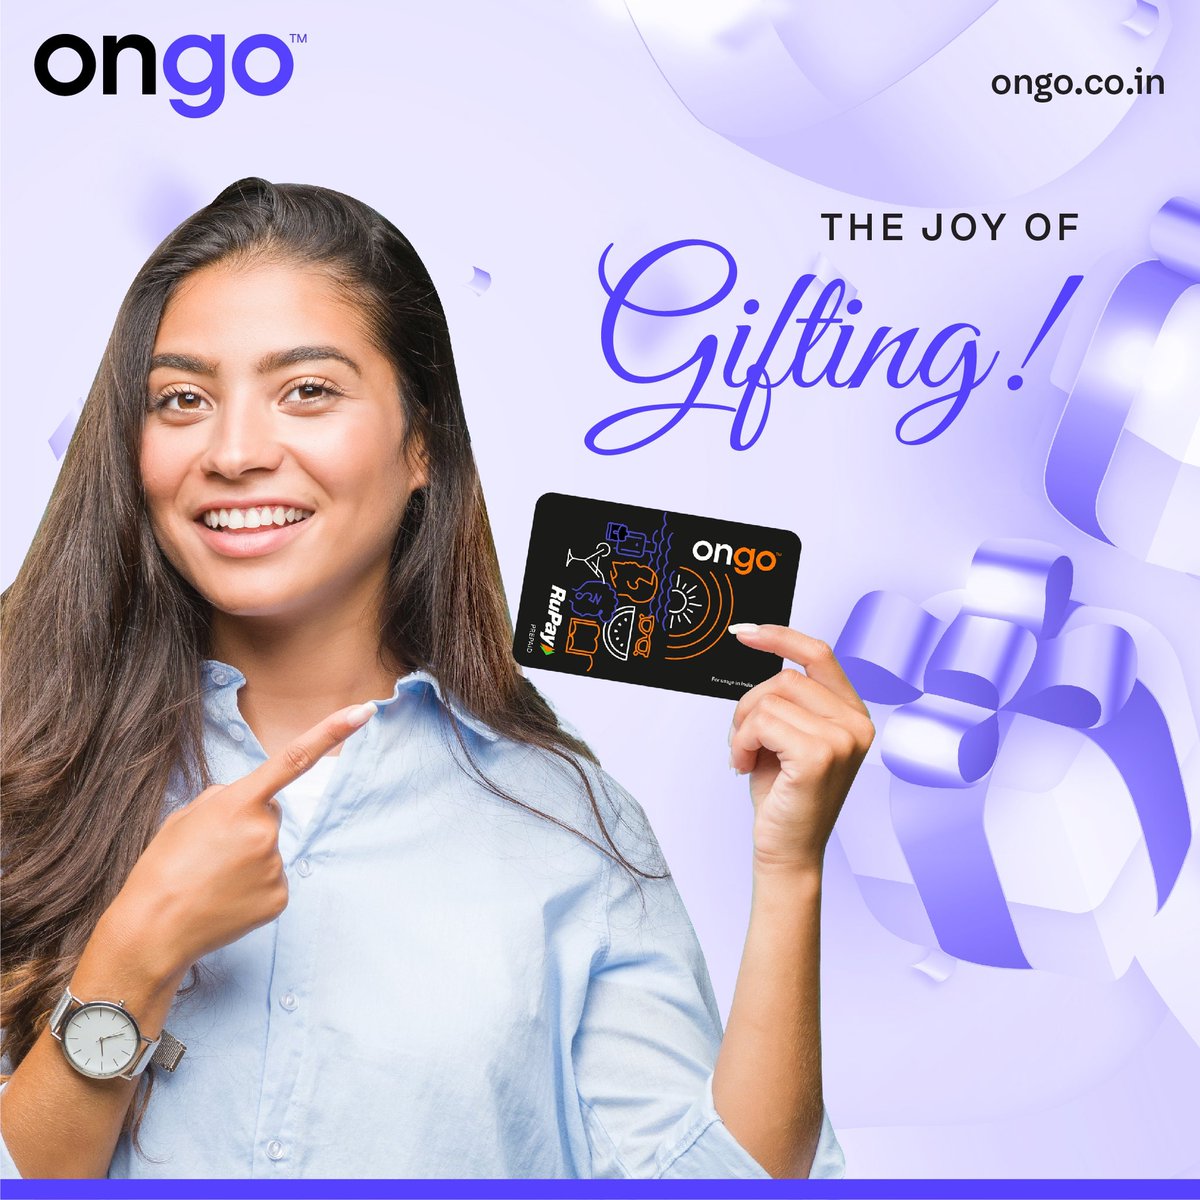 Experience the joy of gifting with #Ongo gift cards - the perfect gifting option for every occasion.

#IndiaTransact #AGSTTL #banking #fintech #digitalpayments #giftcards